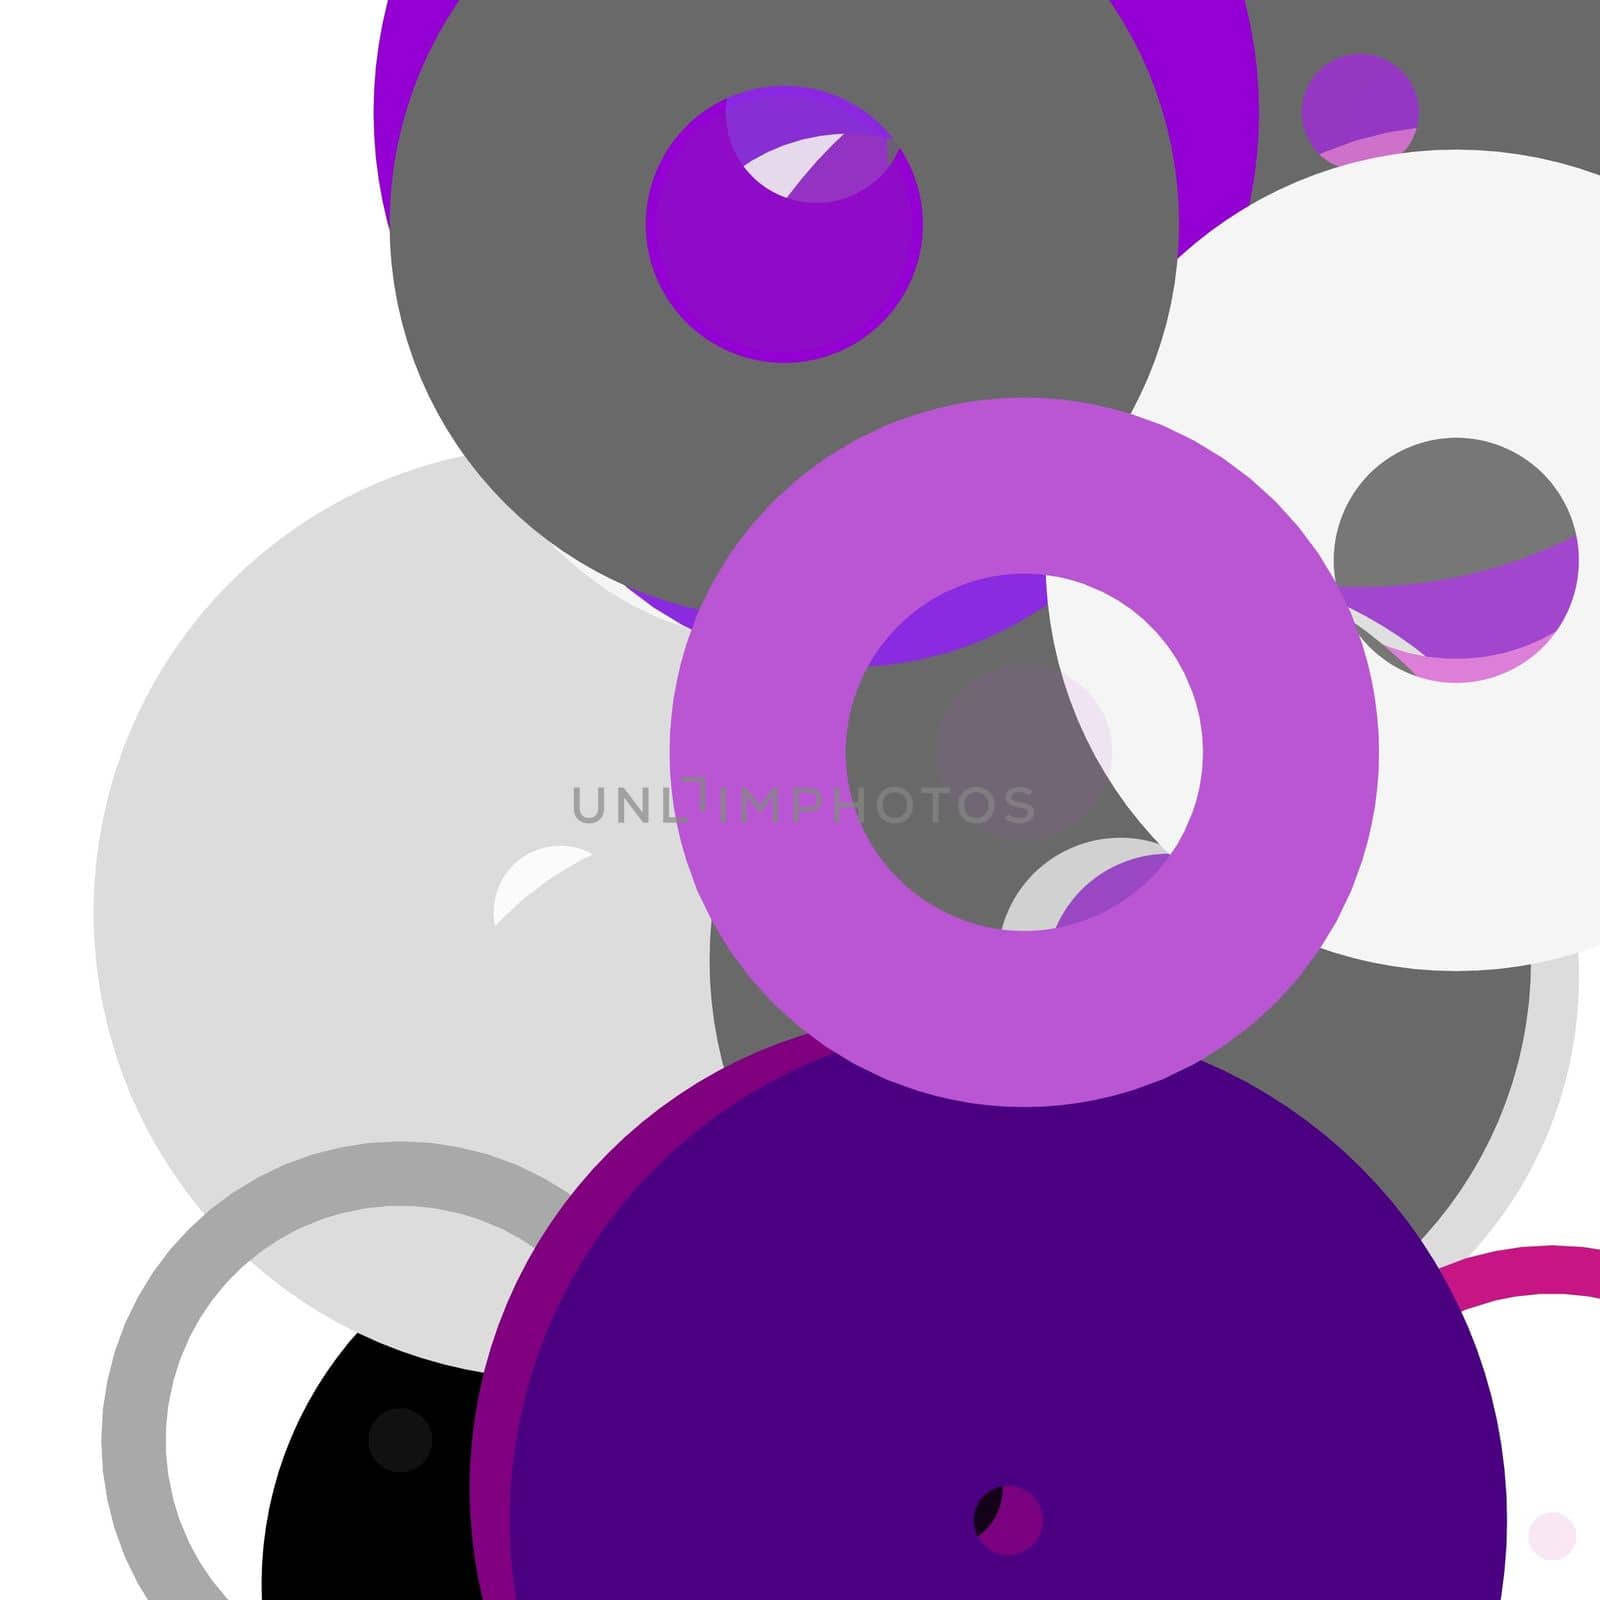 Abstract grey violet circles illustration background by claudiodivizia